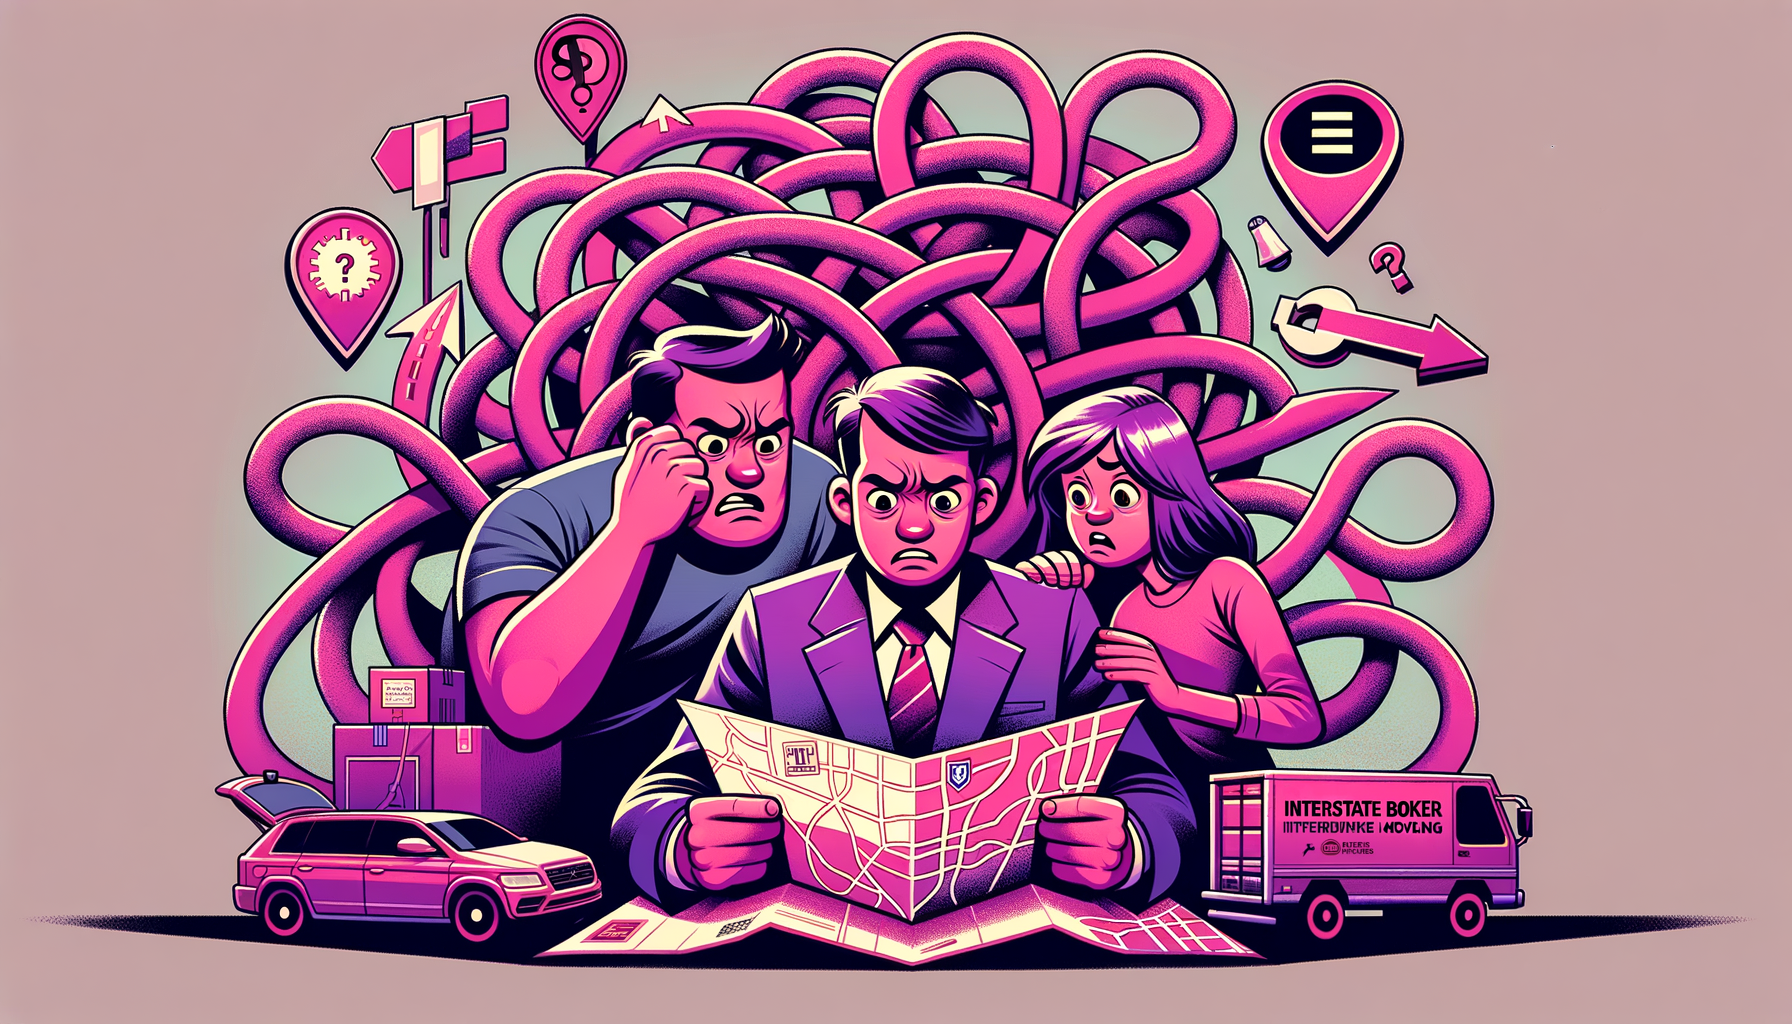 Cartoon-like illustration in fuschia of a troubled family looking at a complex map filled with roadblocks and hidden fees symbols, representing the challenges of working with interstate moving brokers.